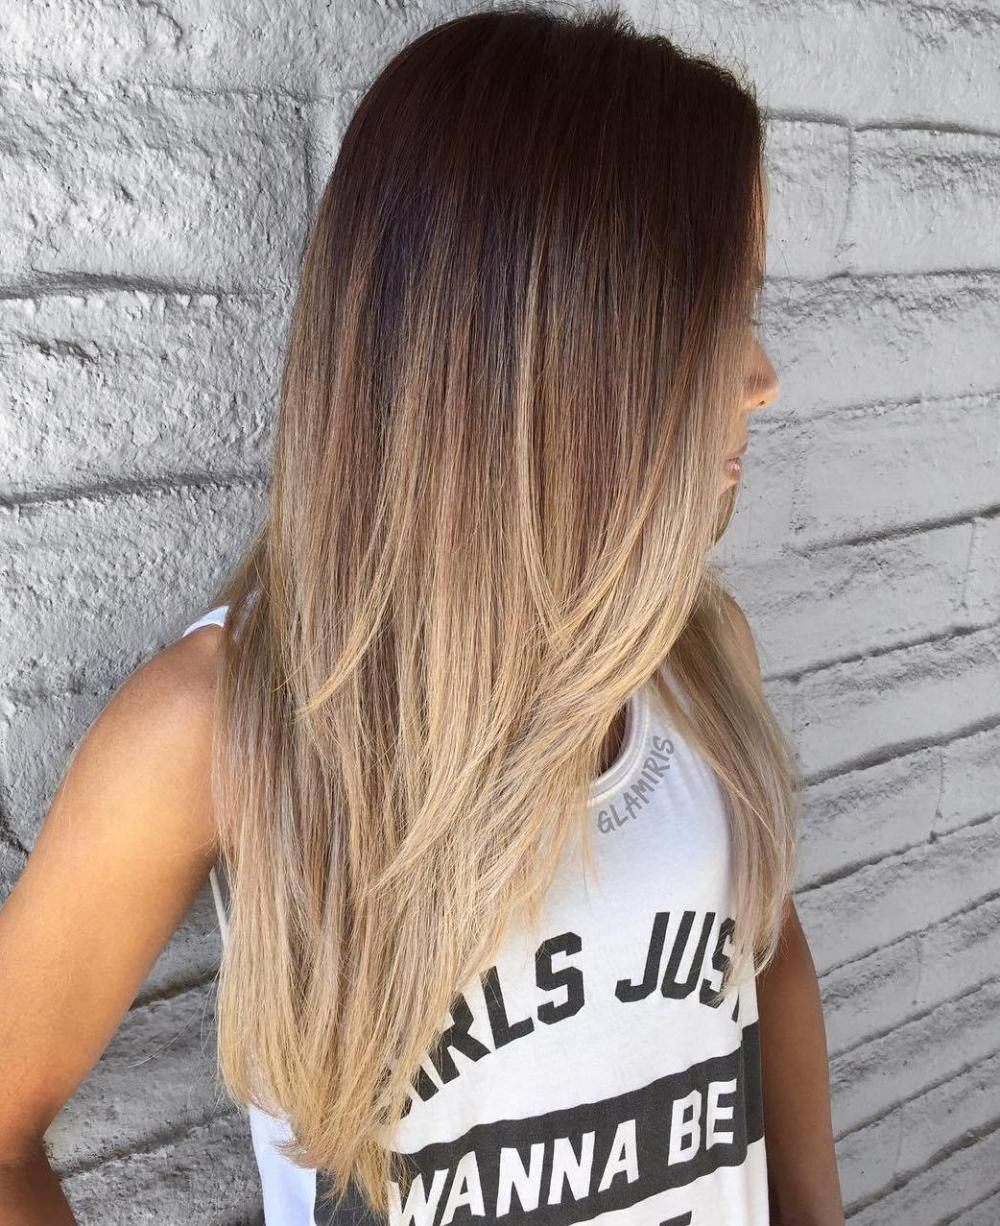 10 Unique Haircut And Color Ideas For Long Hair 51 blonde and brown hair color ideas for summer 2019 hair beauty 2024